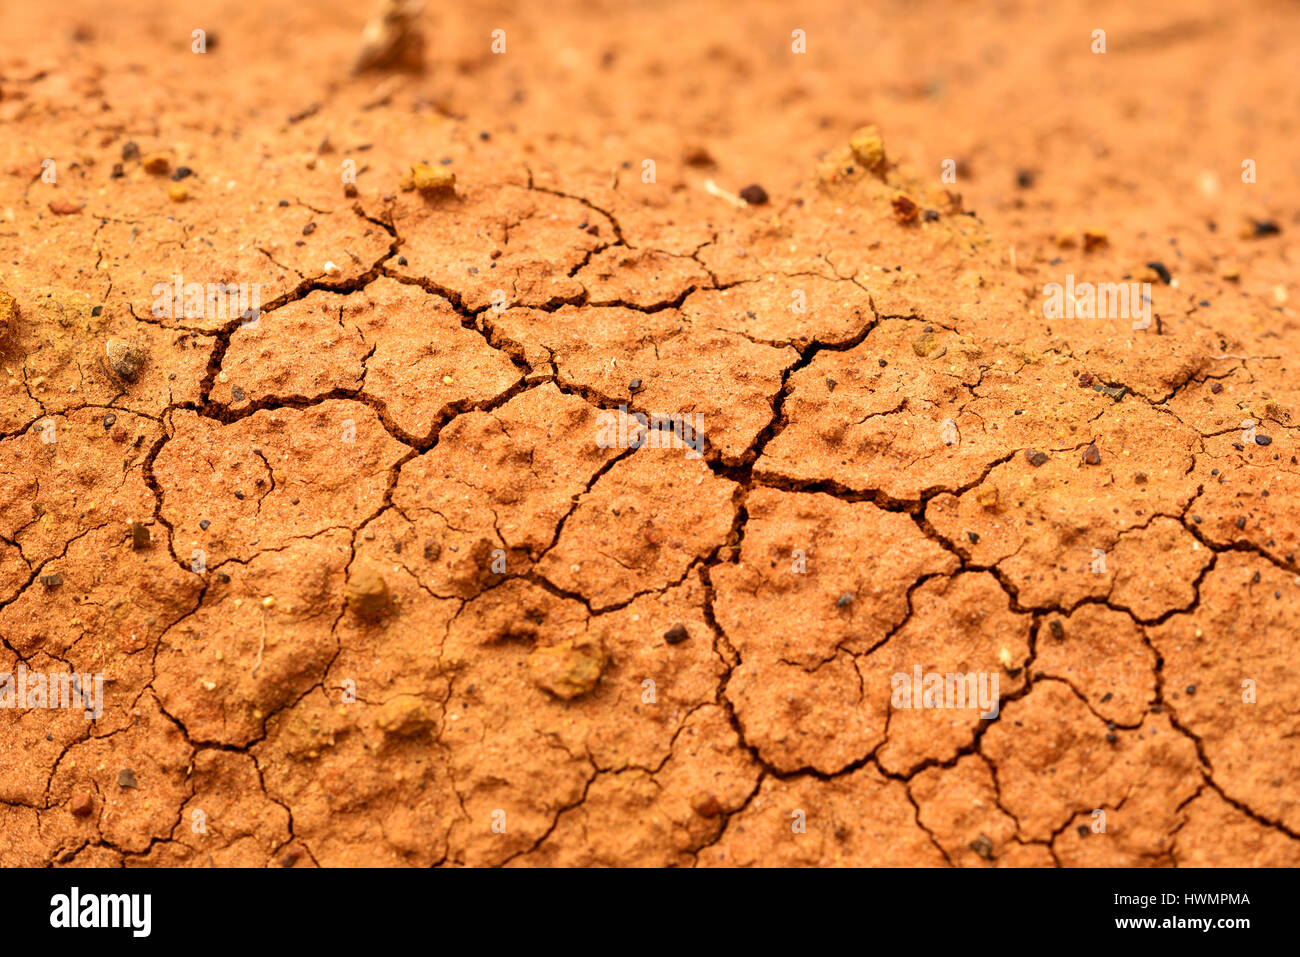 Dry earth, dryness, drought, outback, Australia, Western Australia, Down under Stock Photo